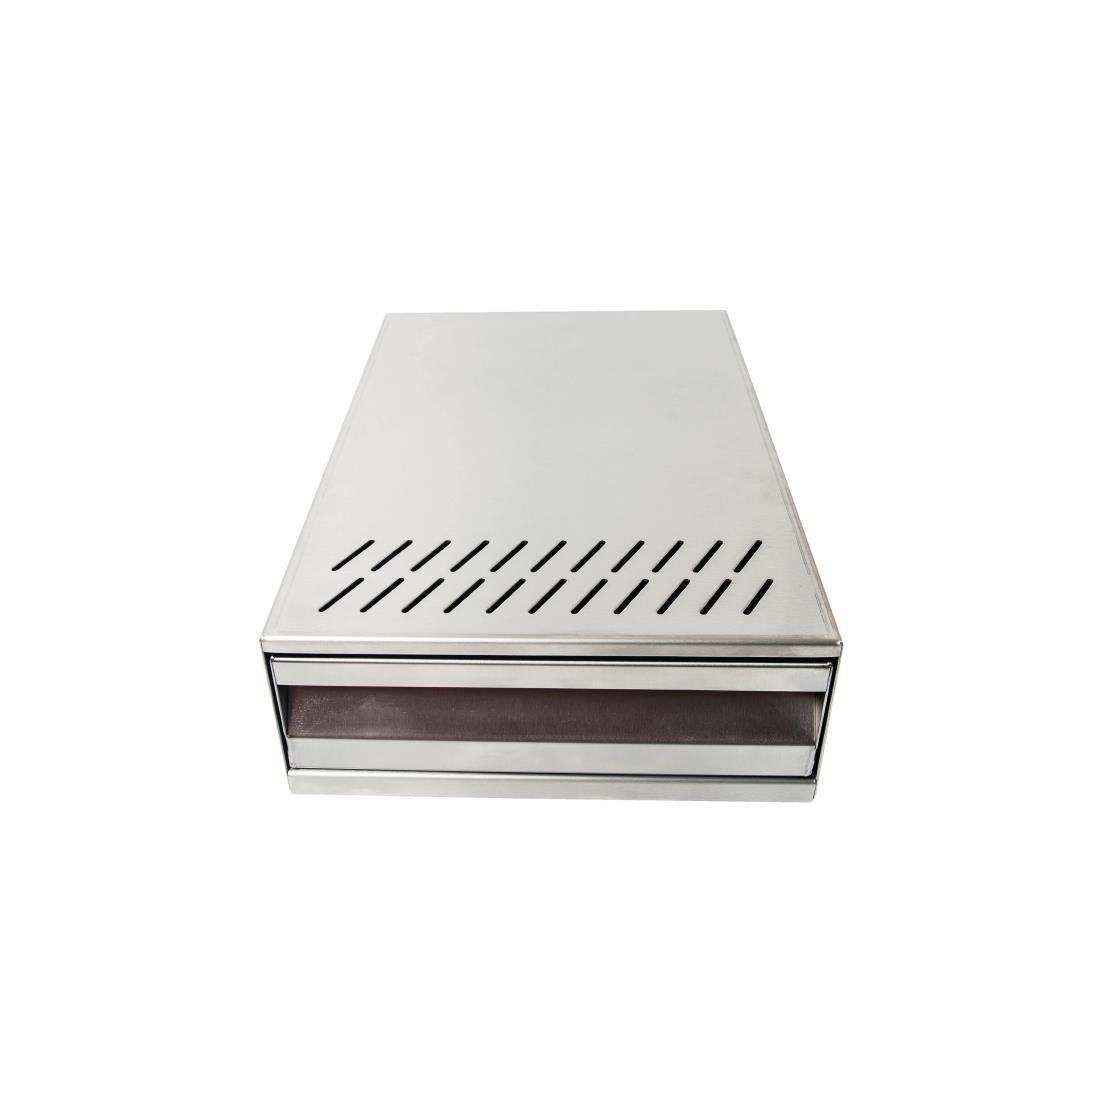 Premium Stainless Steel Knock Out Box - HC559  - 2